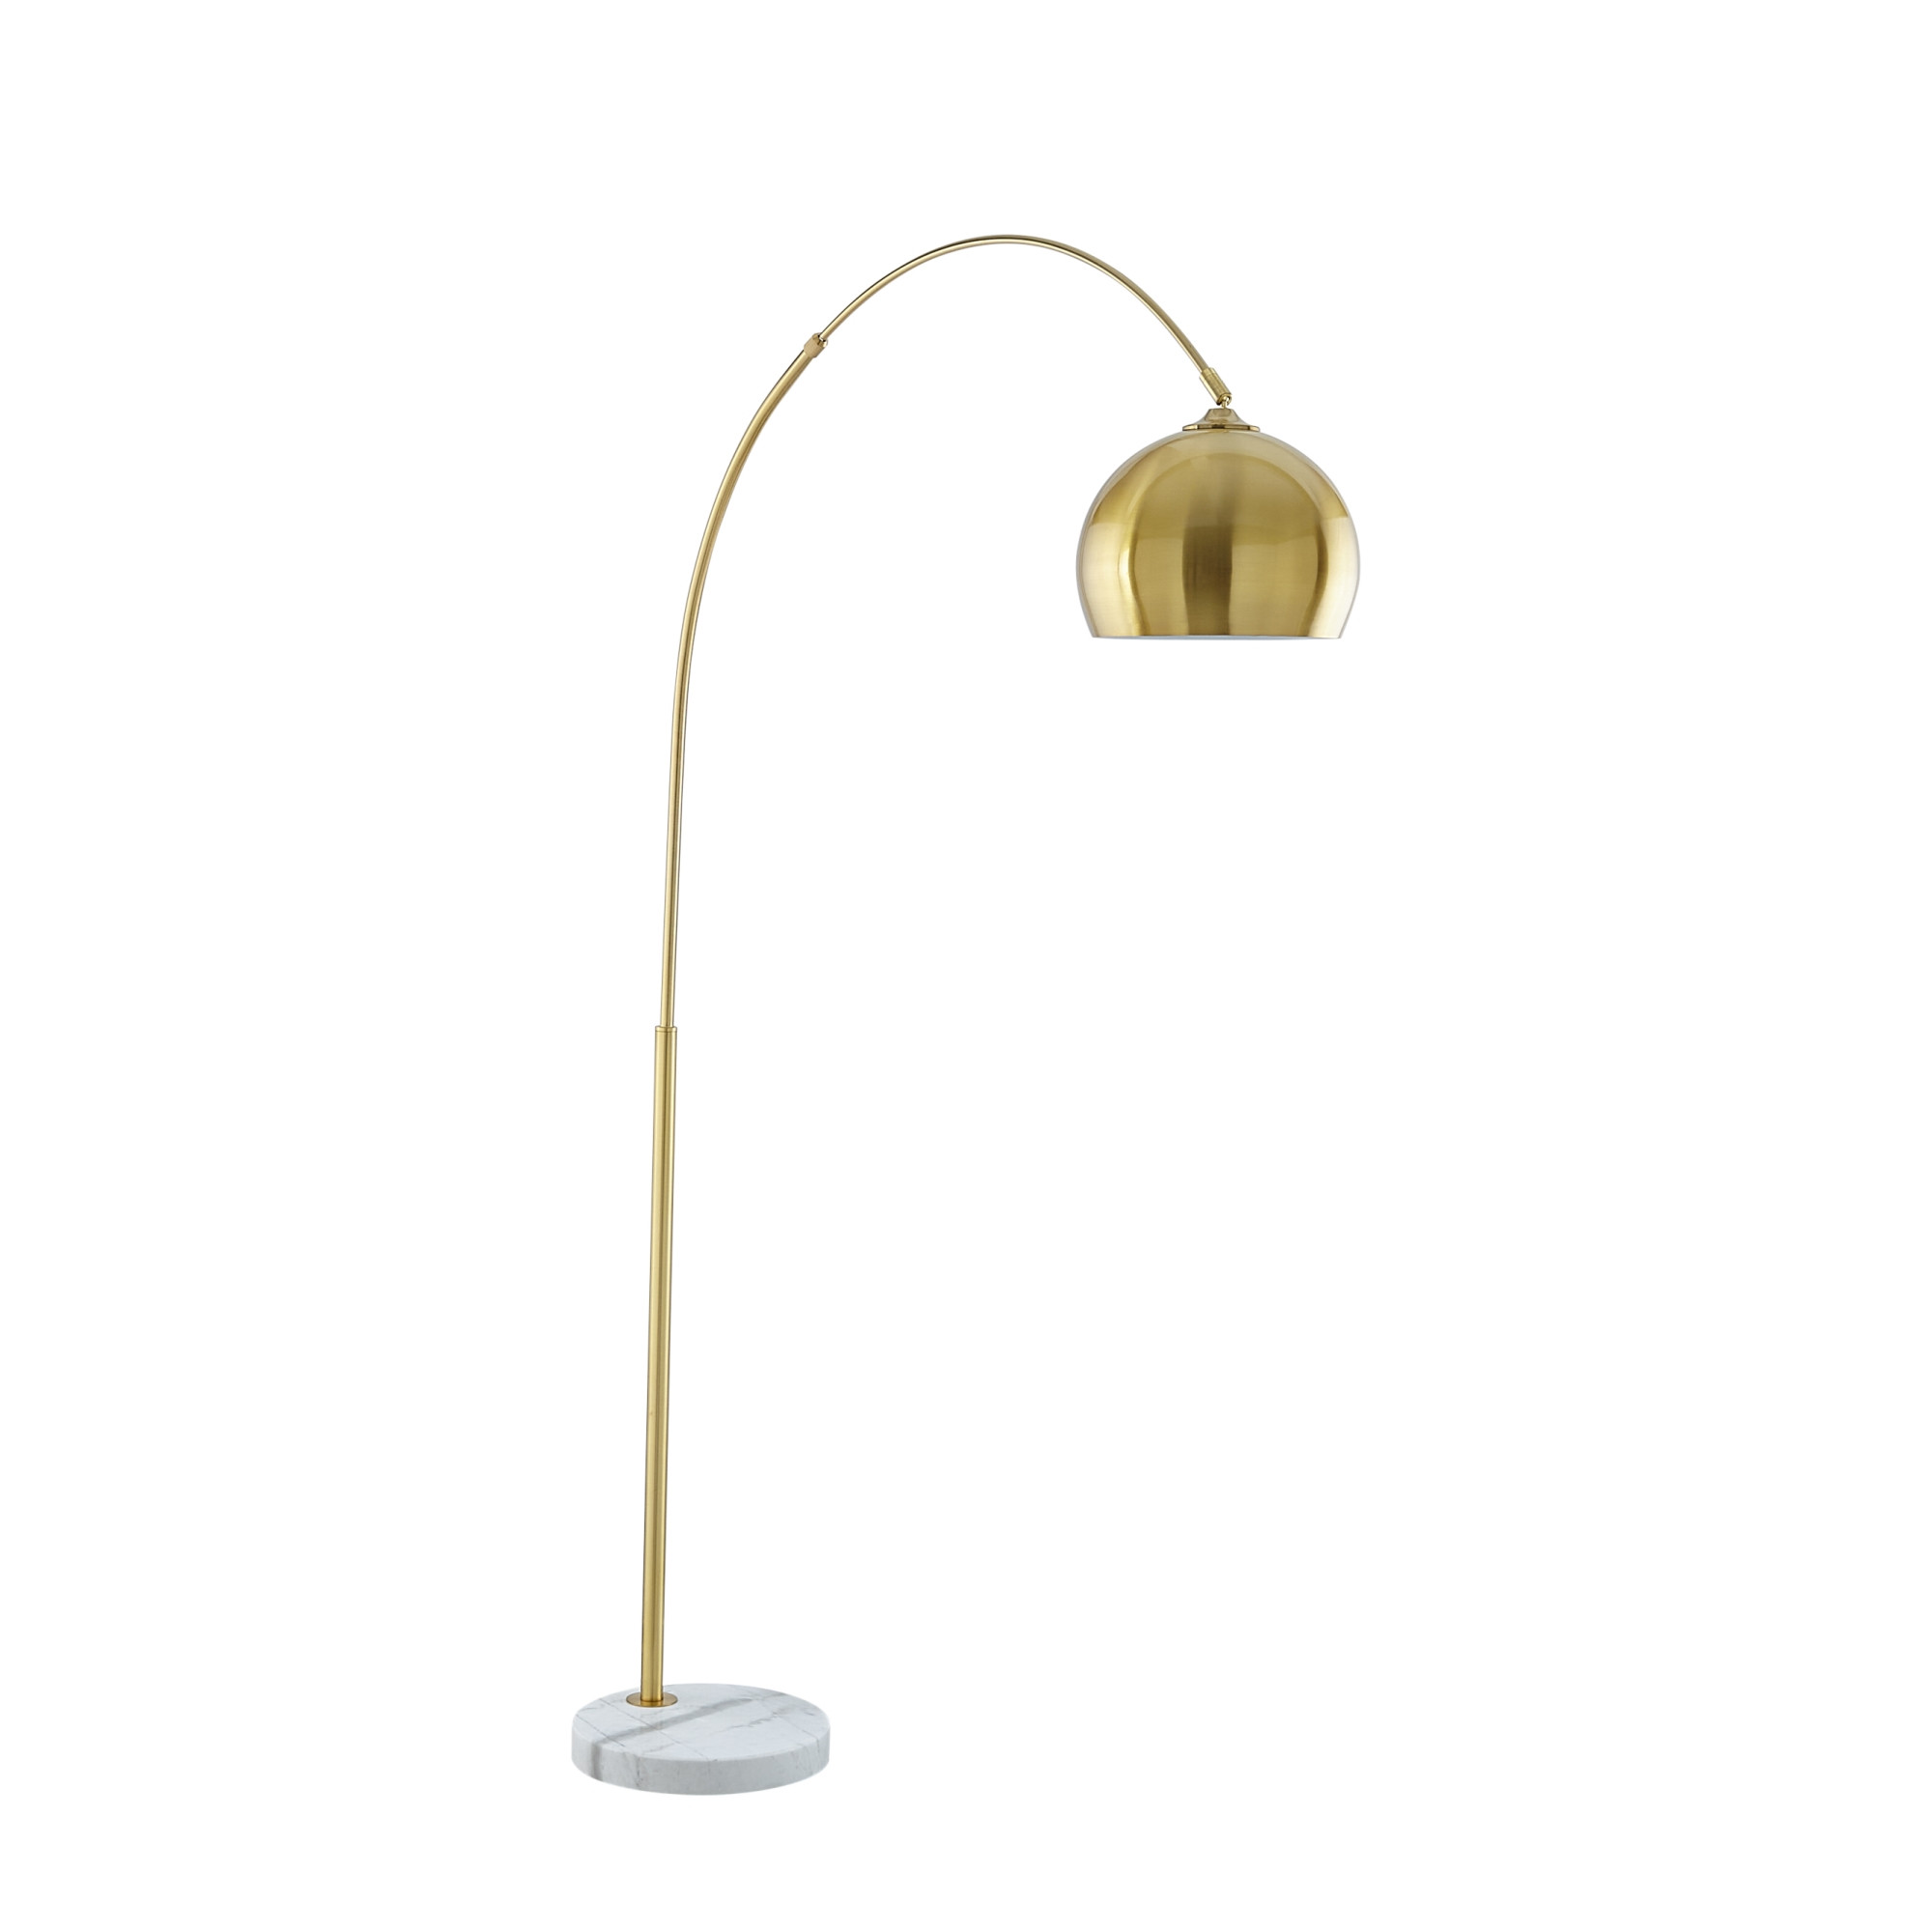 76" Brass Arched Floor Lamp With Brass Dome Shade-530711-1